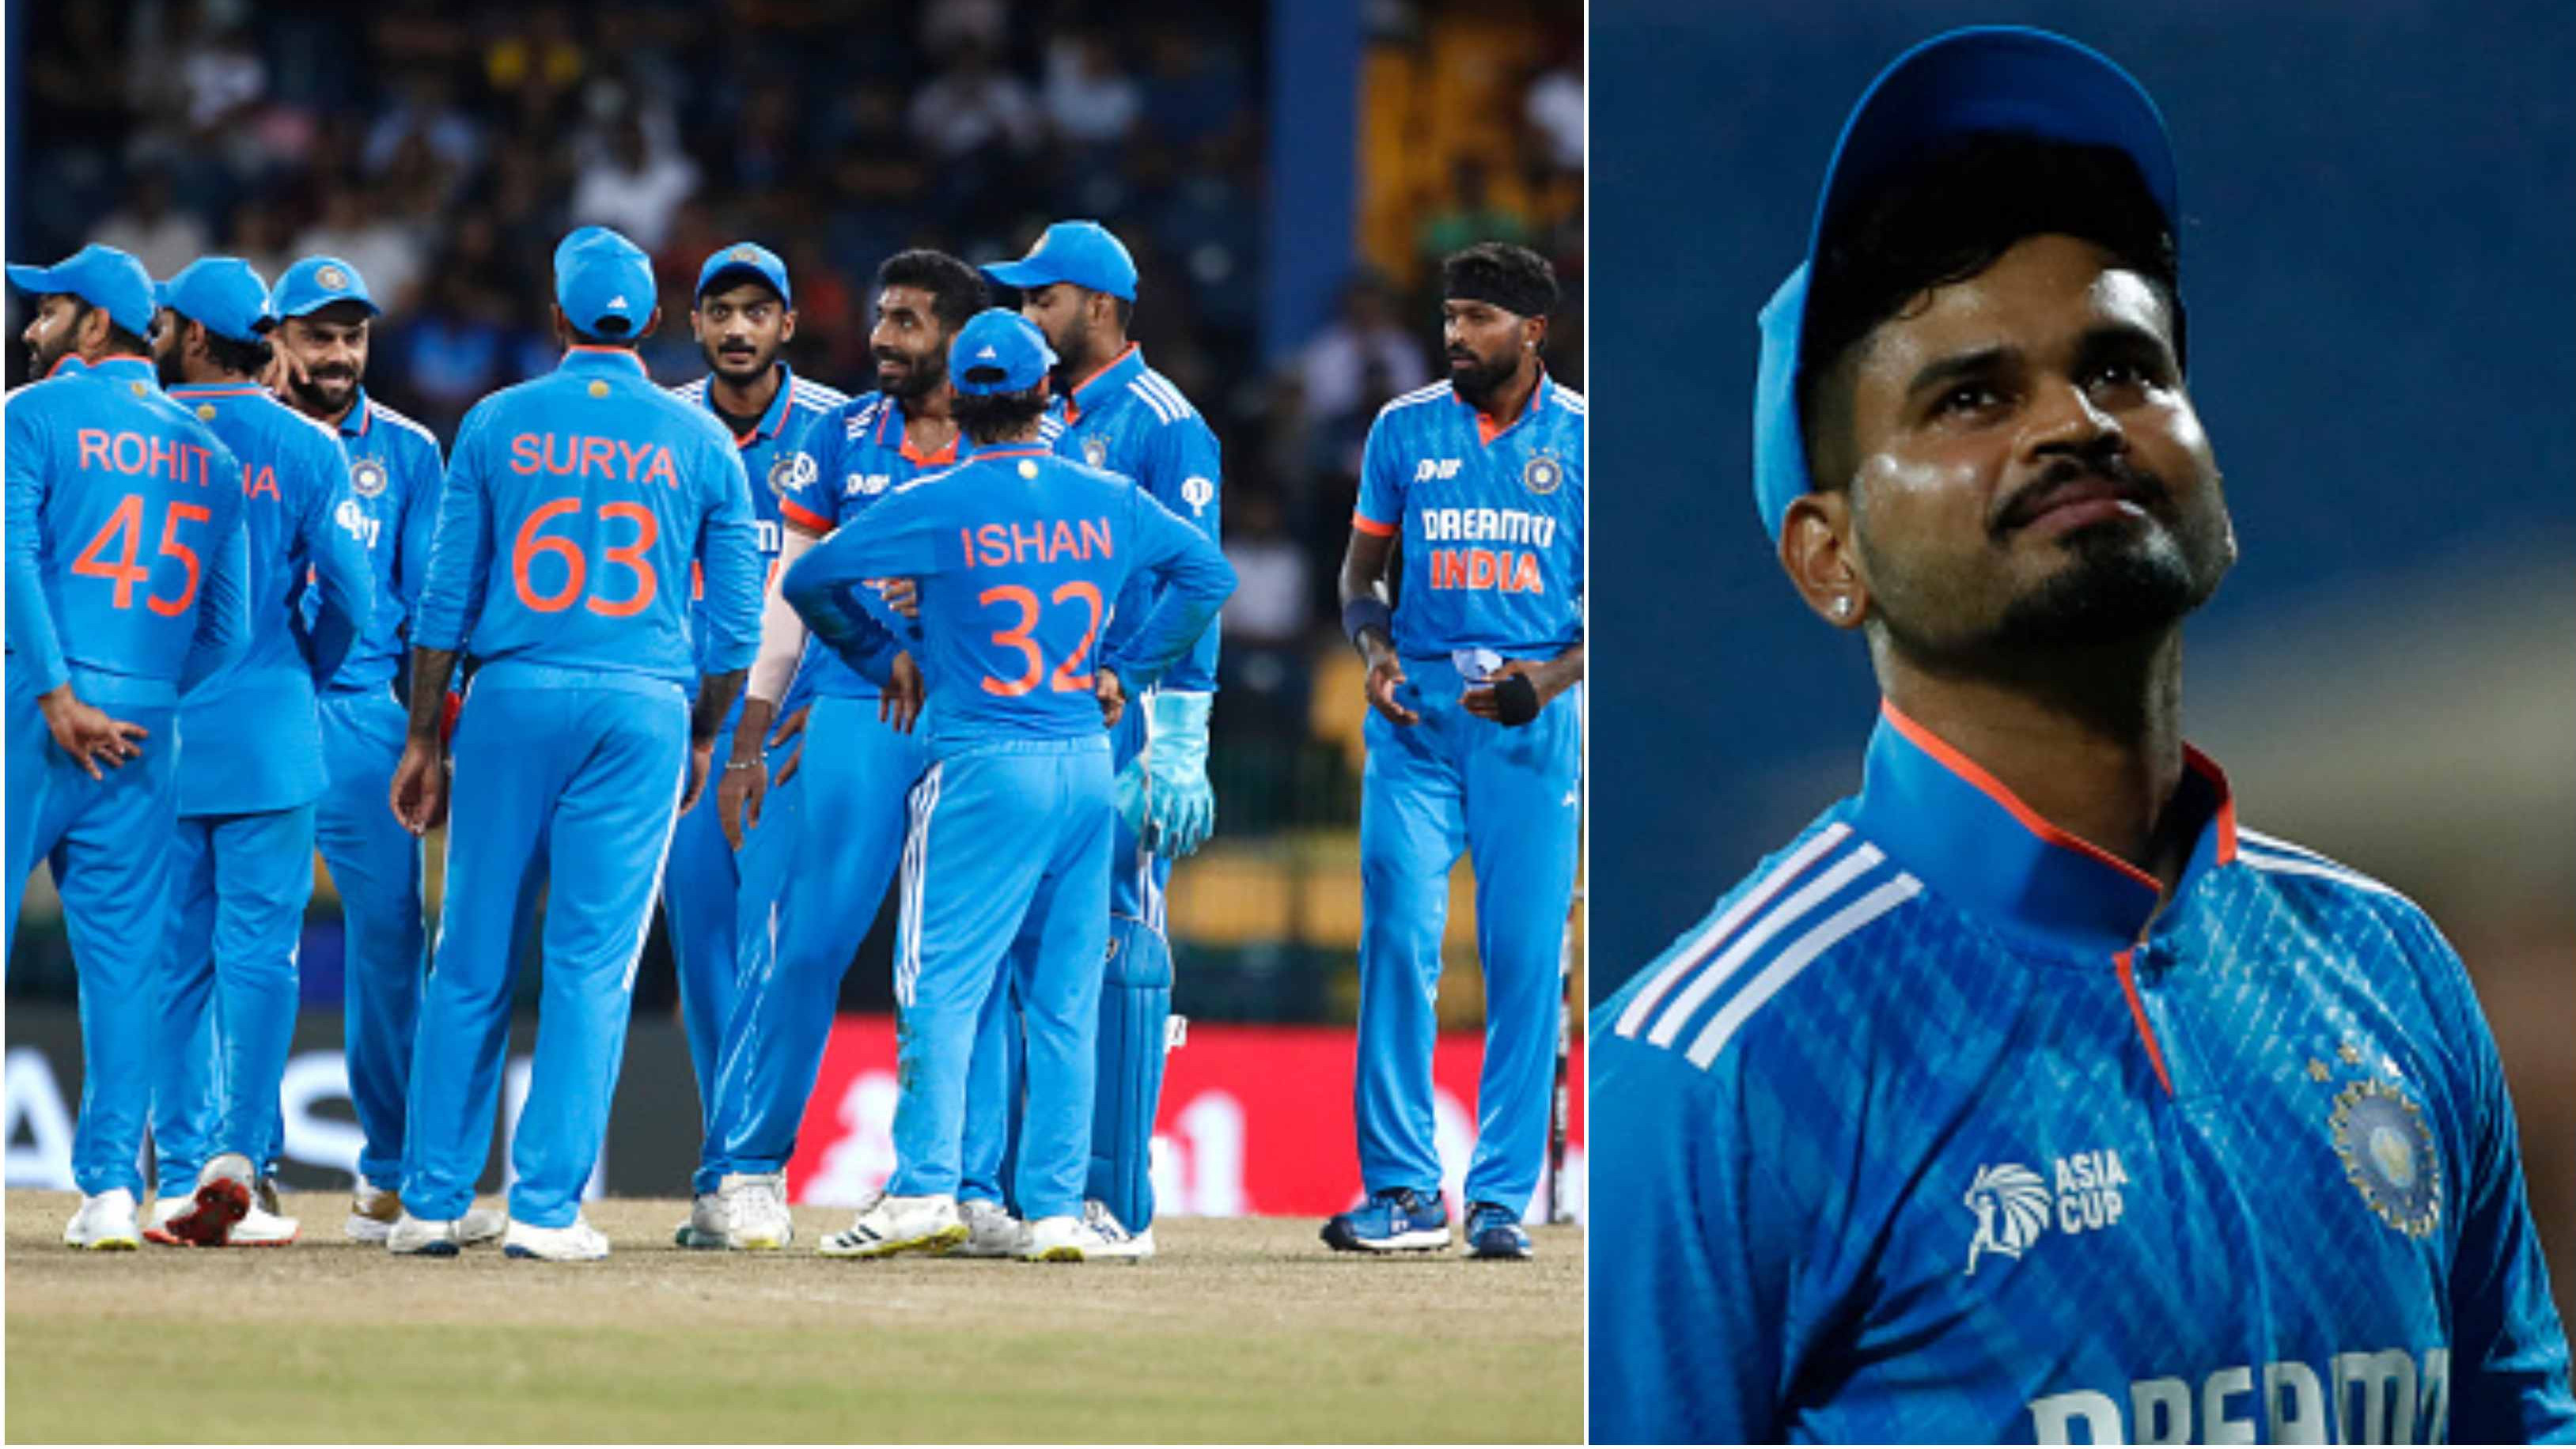 Asia Cup 2023: Bumrah, Siraj and Pandya likely to be rested for Bangladesh game, Shreyas Iyer's availability still uncertain